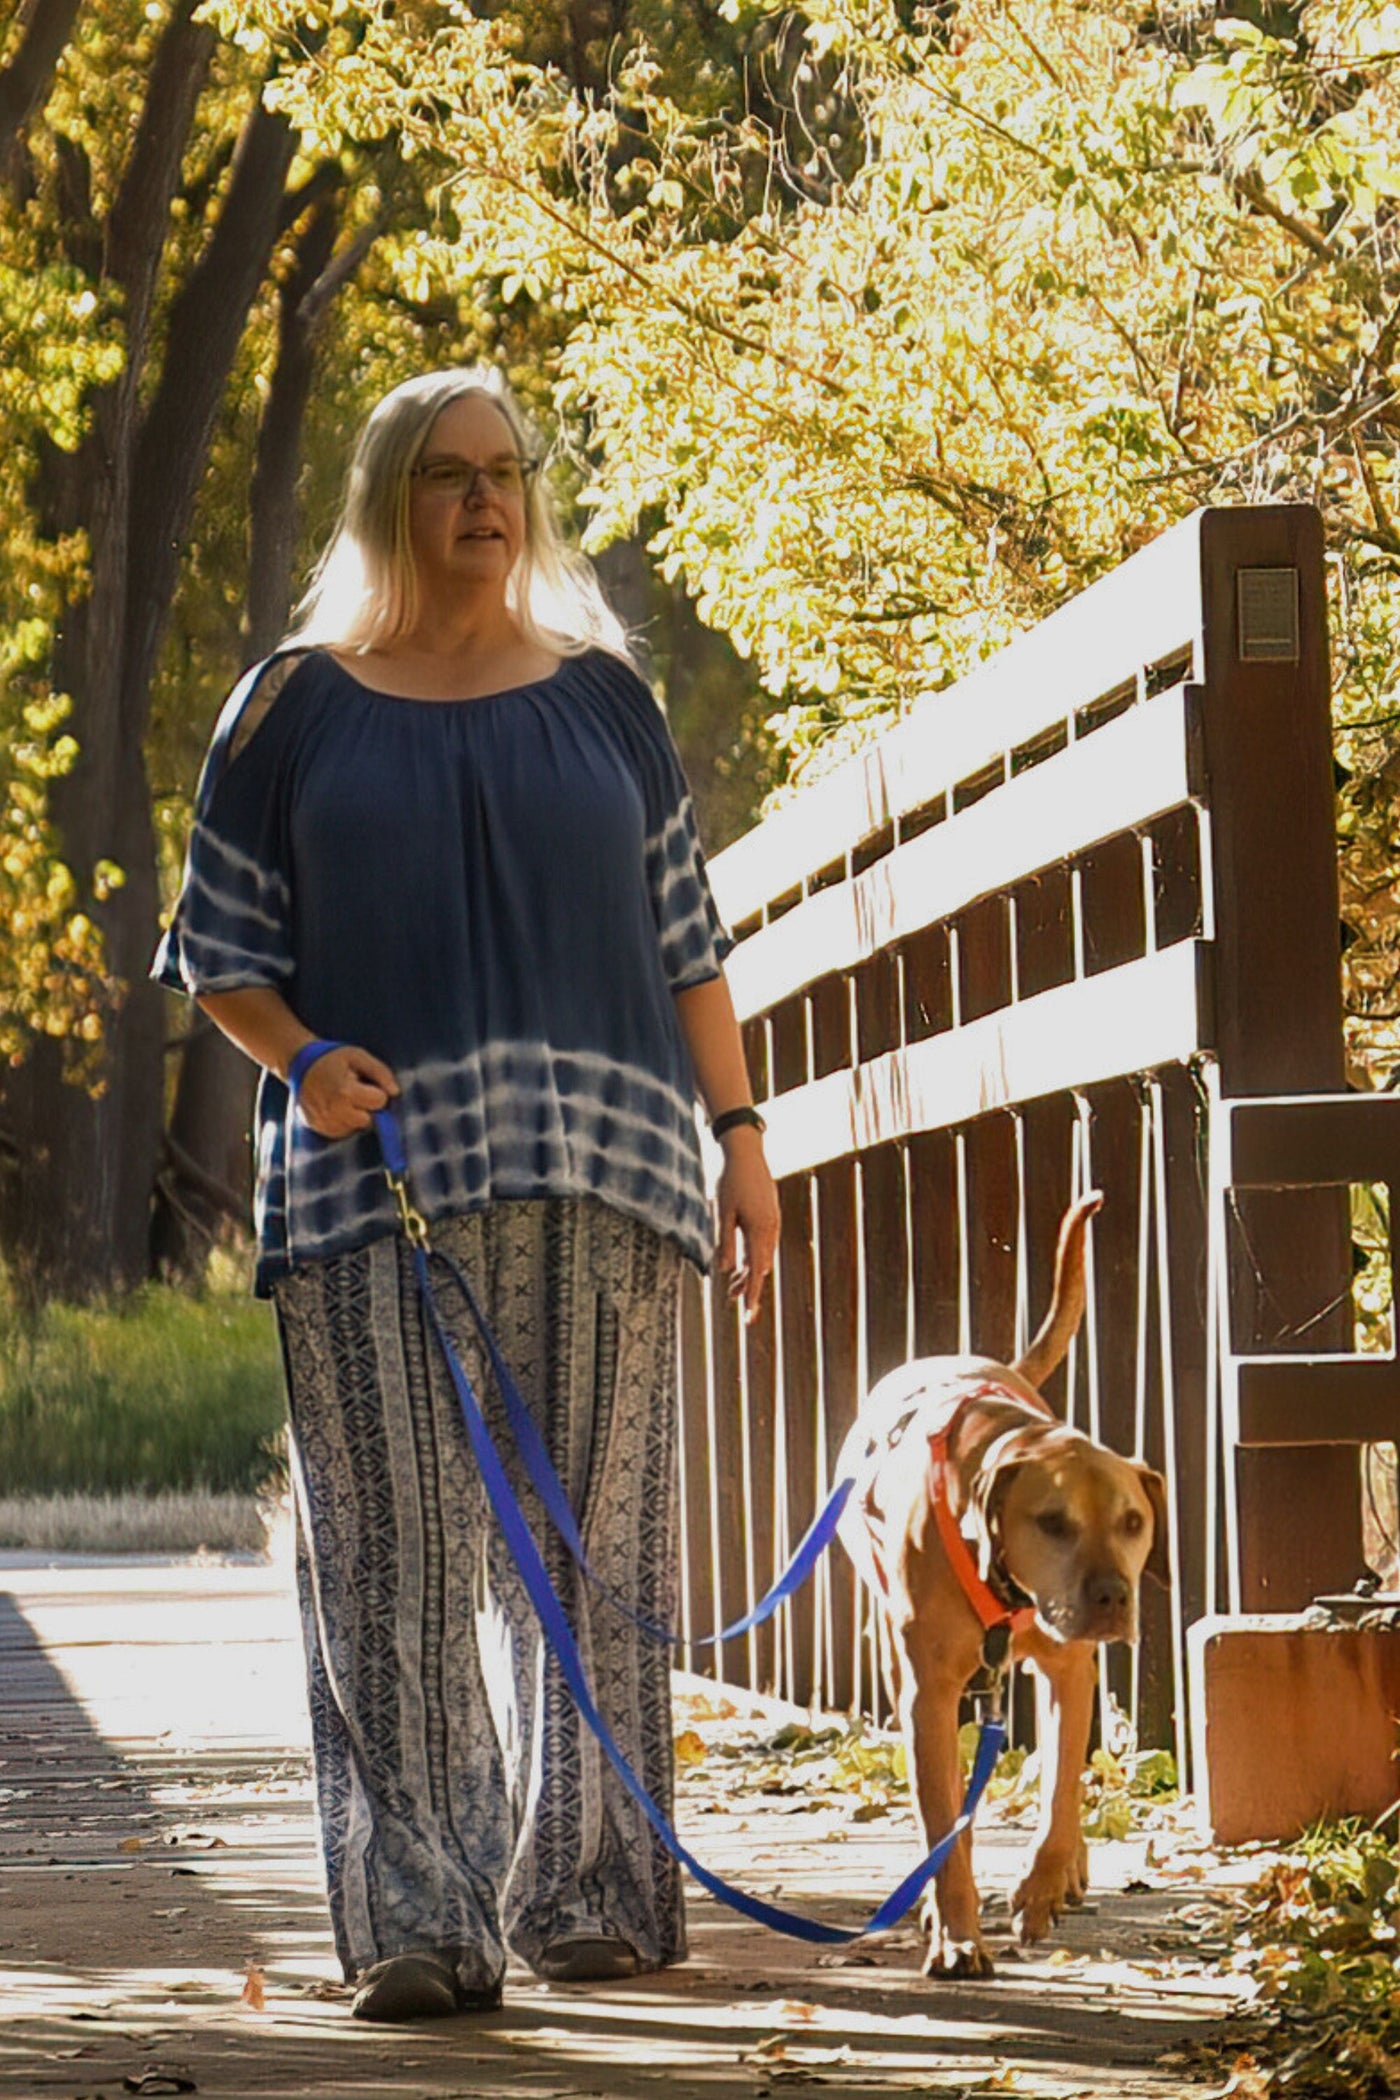 adult female walking across a bridge in the sunlight with an 85 pound mixed breed dog wearing an orange harness, utilizing the no pull leash in blue.